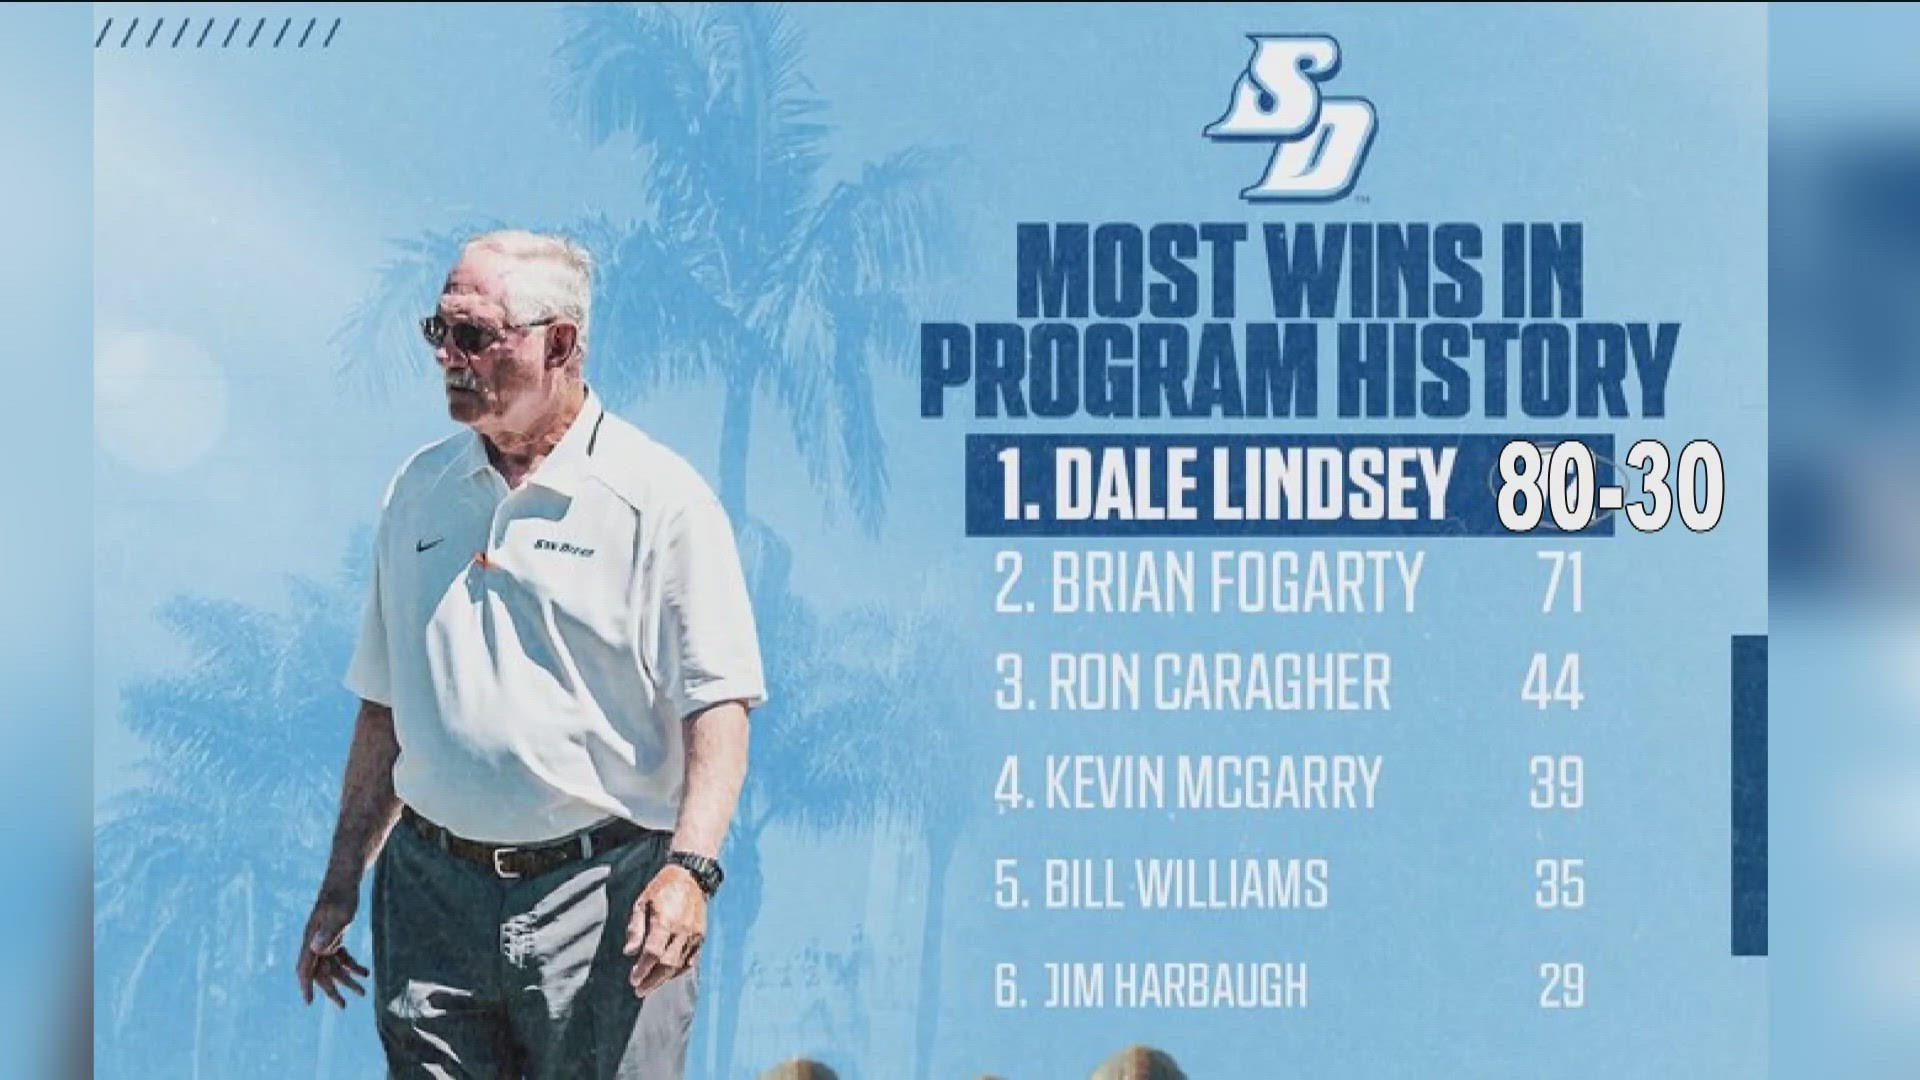 Lindsay is the school's all time winningest coach with a record of 80-30. In his 10 years at USD, his team's won seven pioneer league football championships.